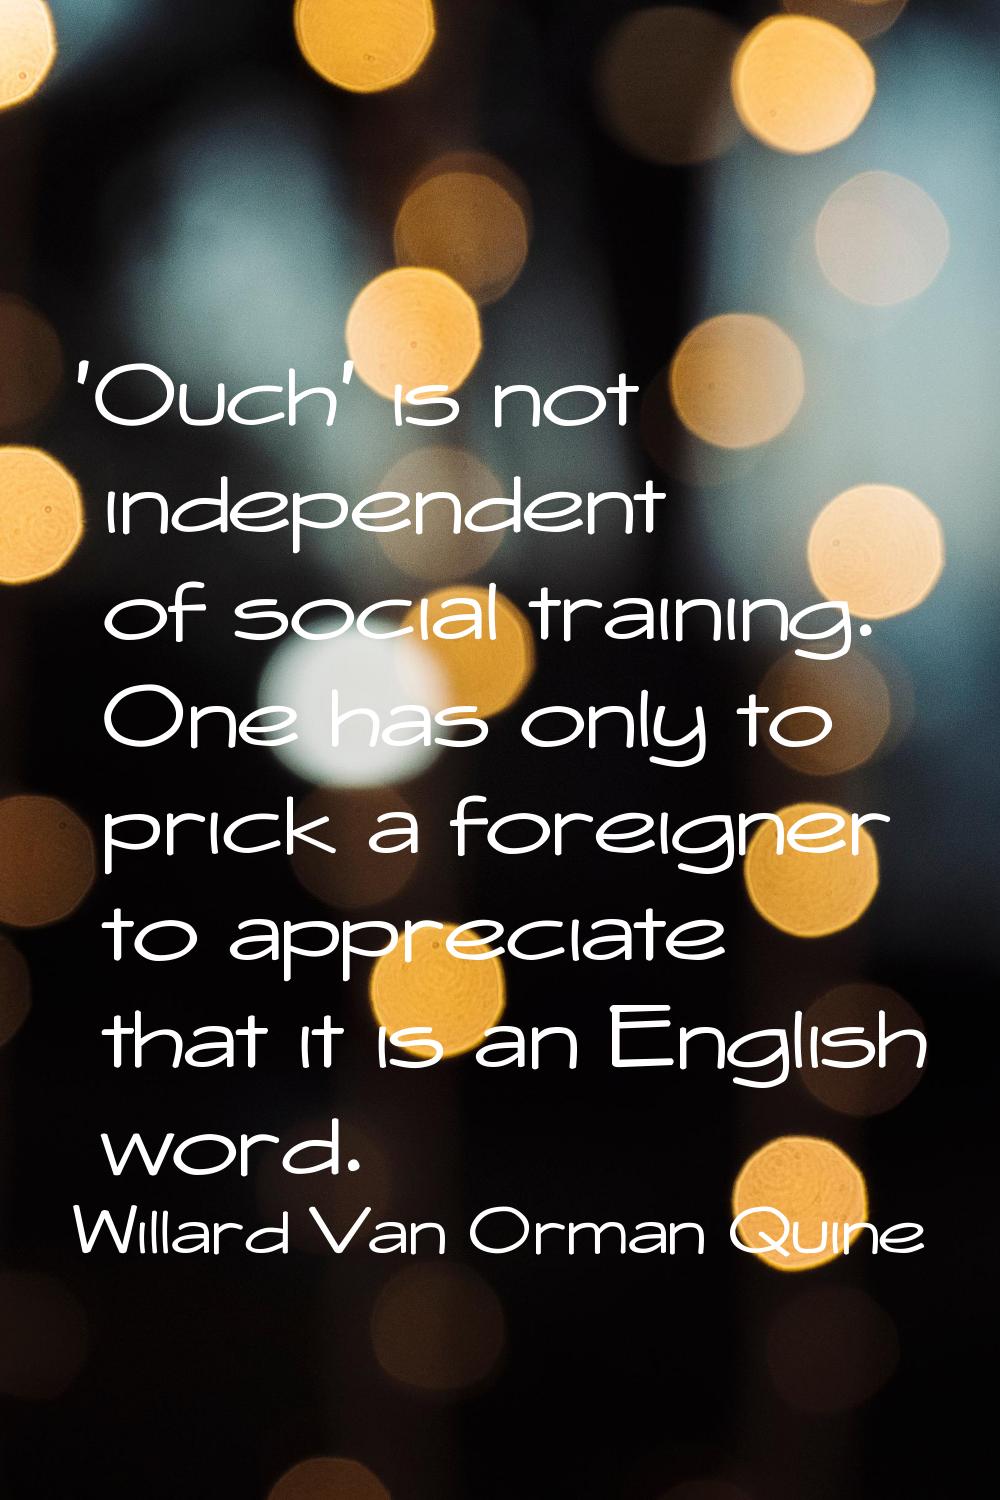 'Ouch' is not independent of social training. One has only to prick a foreigner to appreciate that 